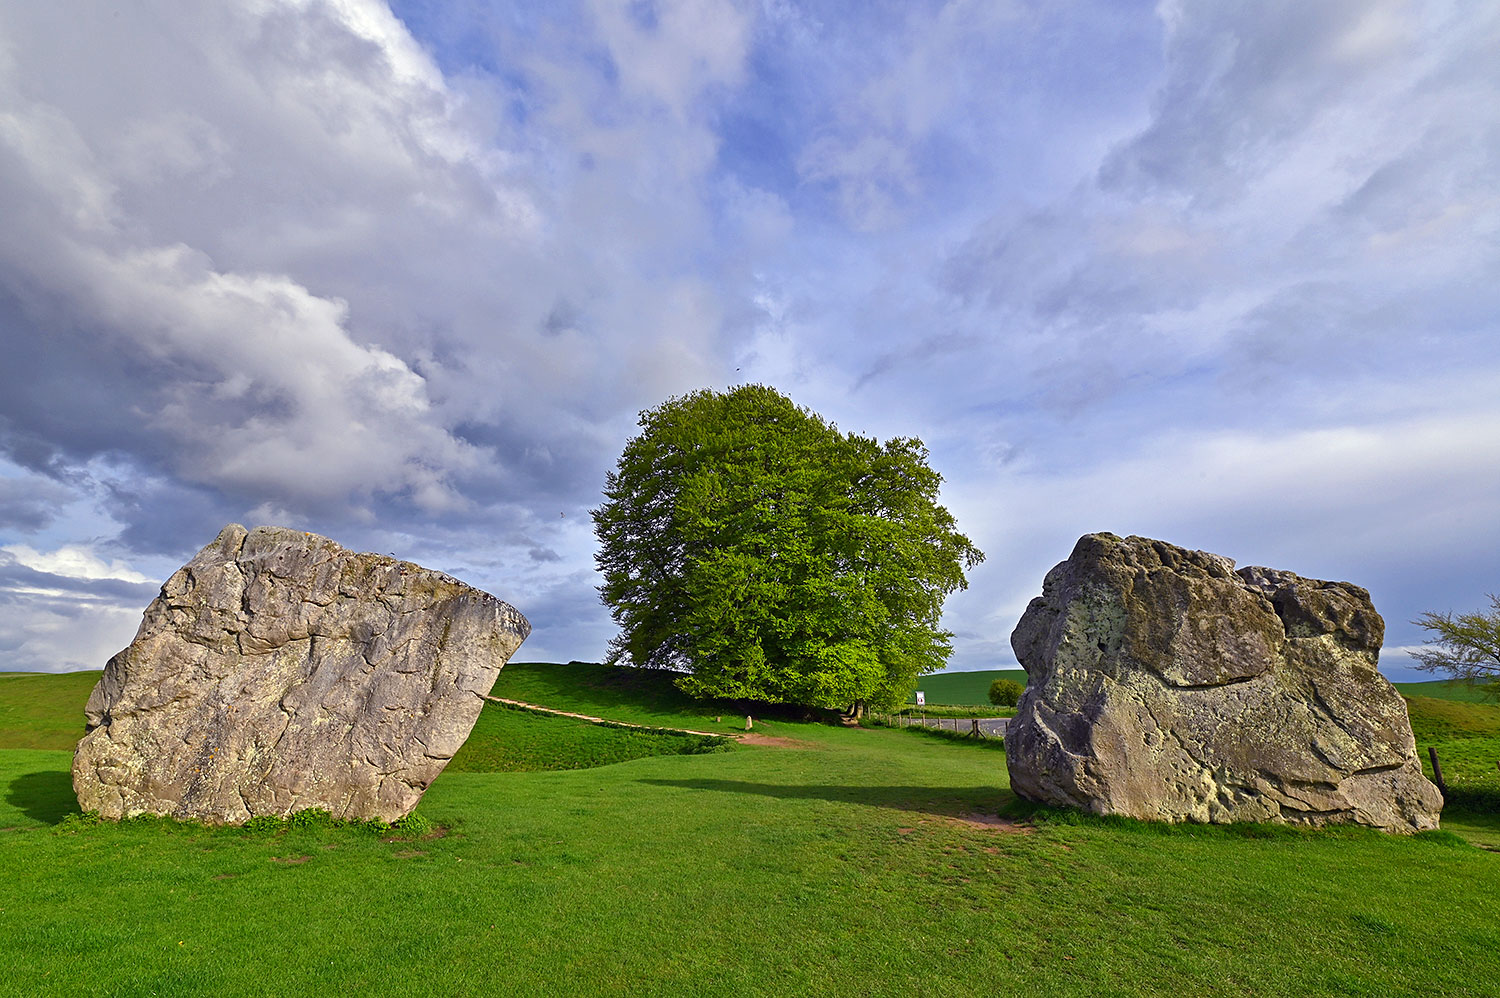 Picture of standing stones in a stone circle with a big tree in the background on a sunny May evening